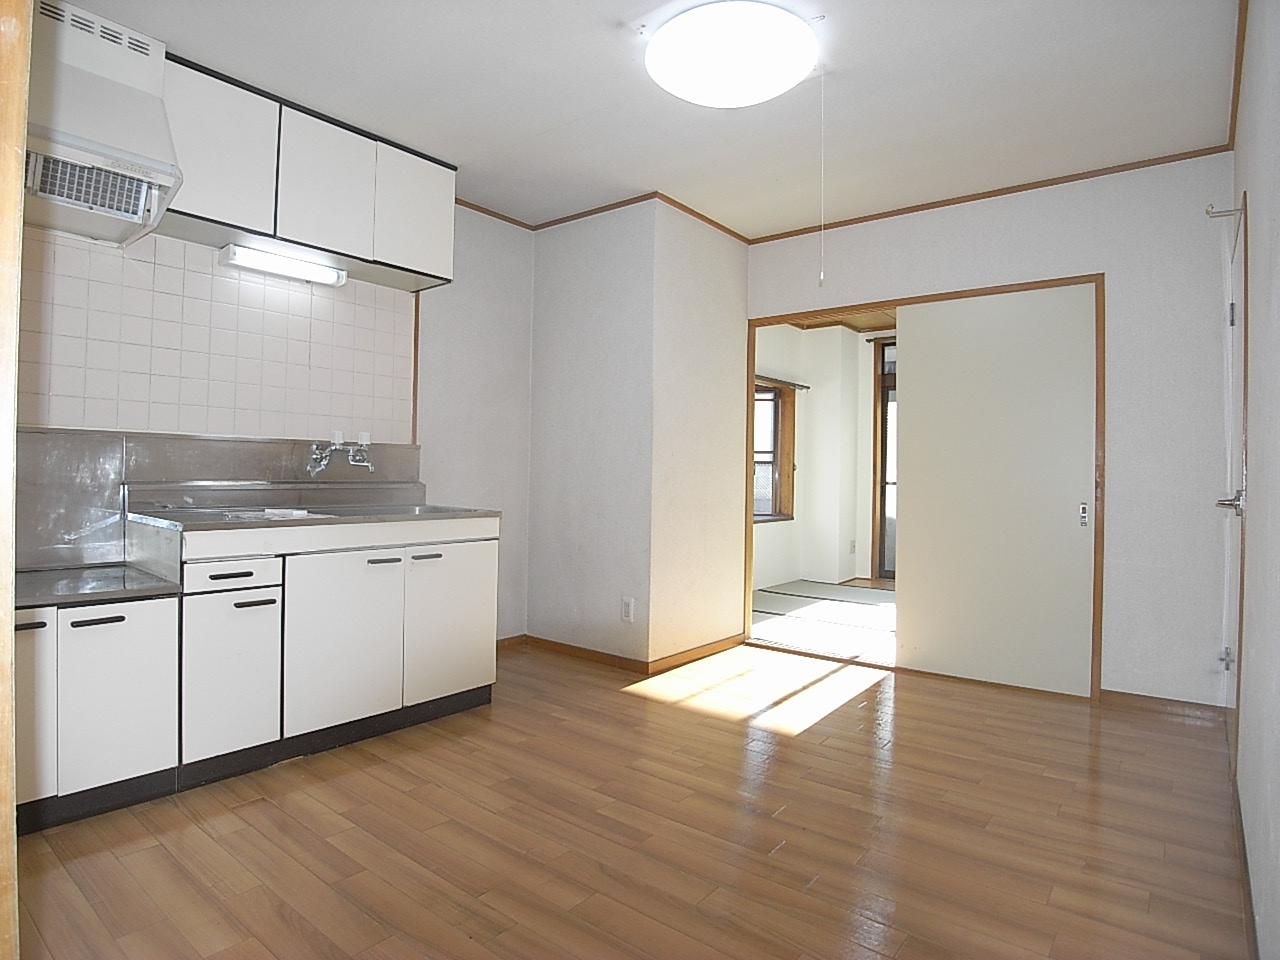 Living and room. Frontage spacious kitchen